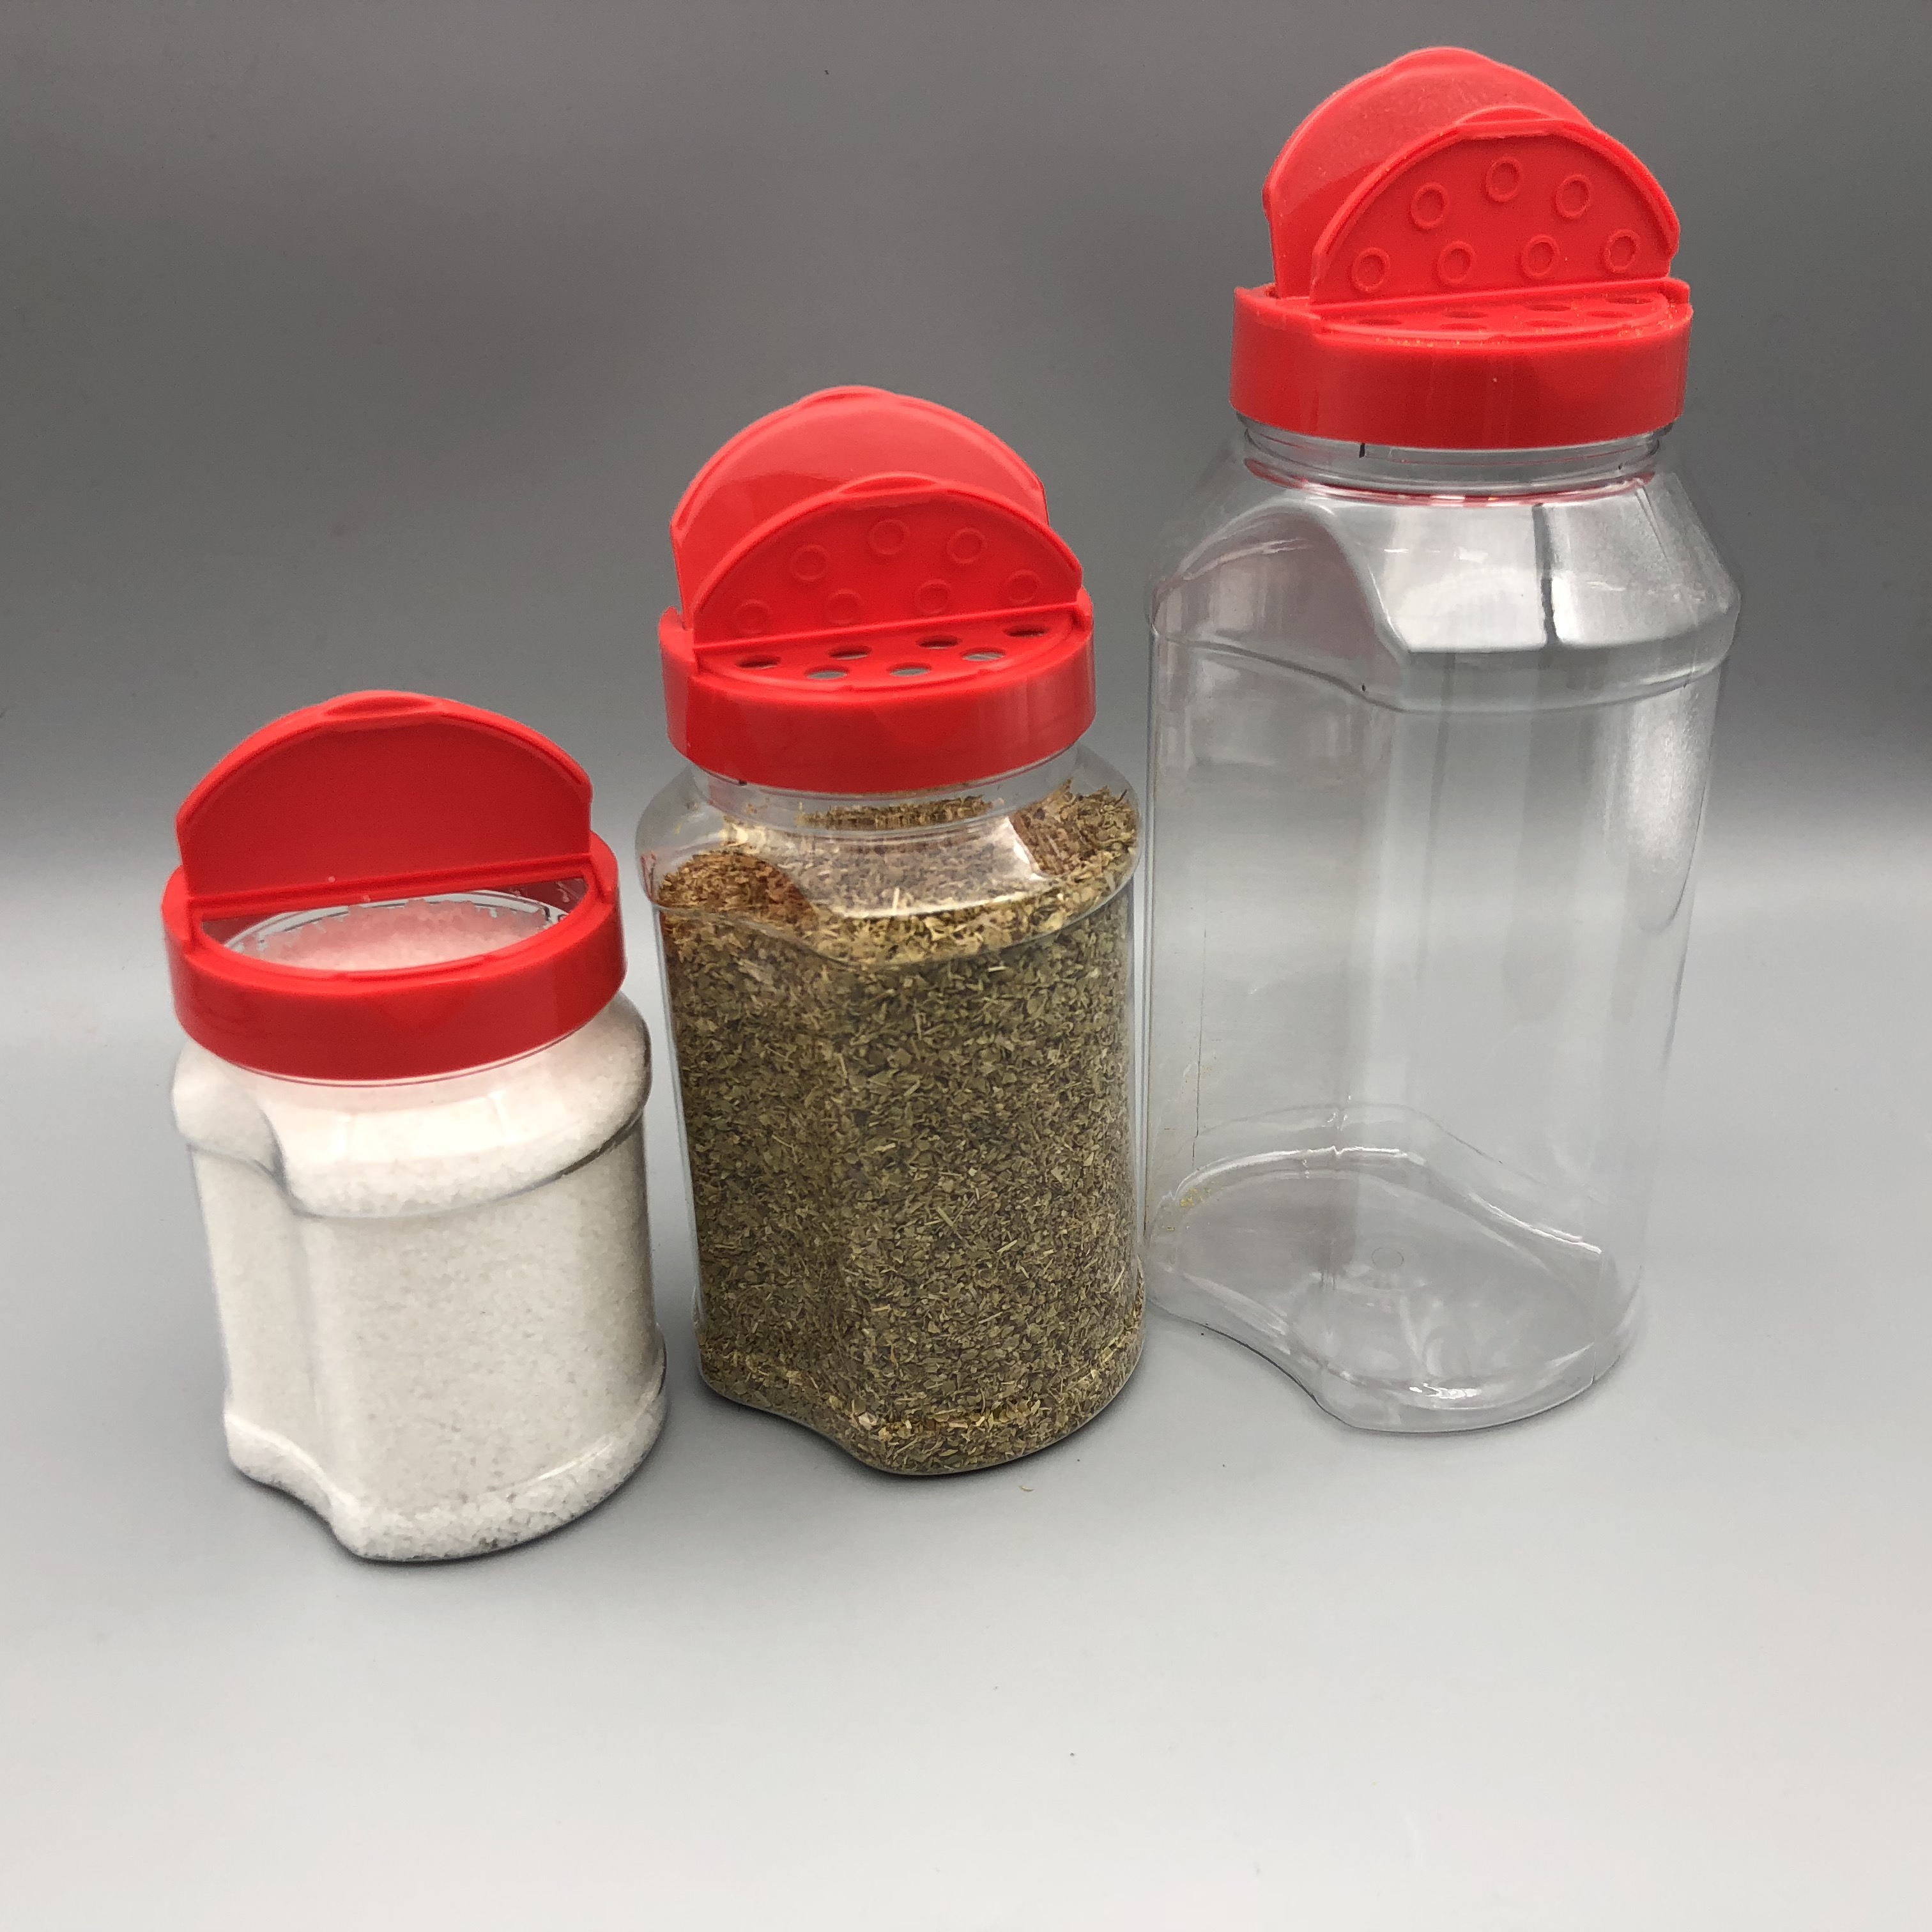 500ML Plastic Spice Shaker Bottle for Curry powder